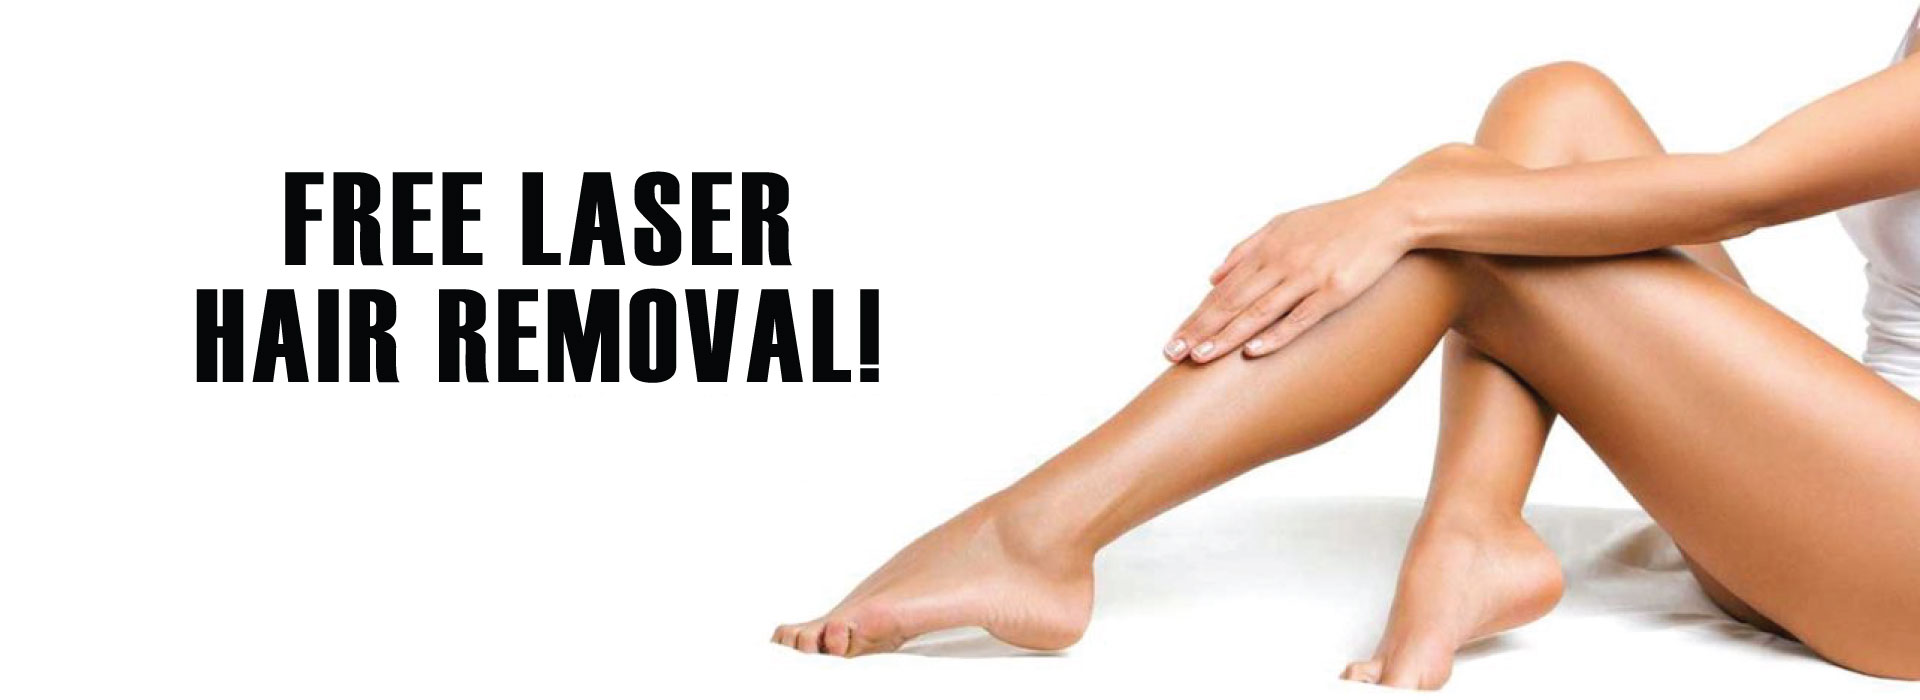 FREE LASER HAIR REMOVAL!